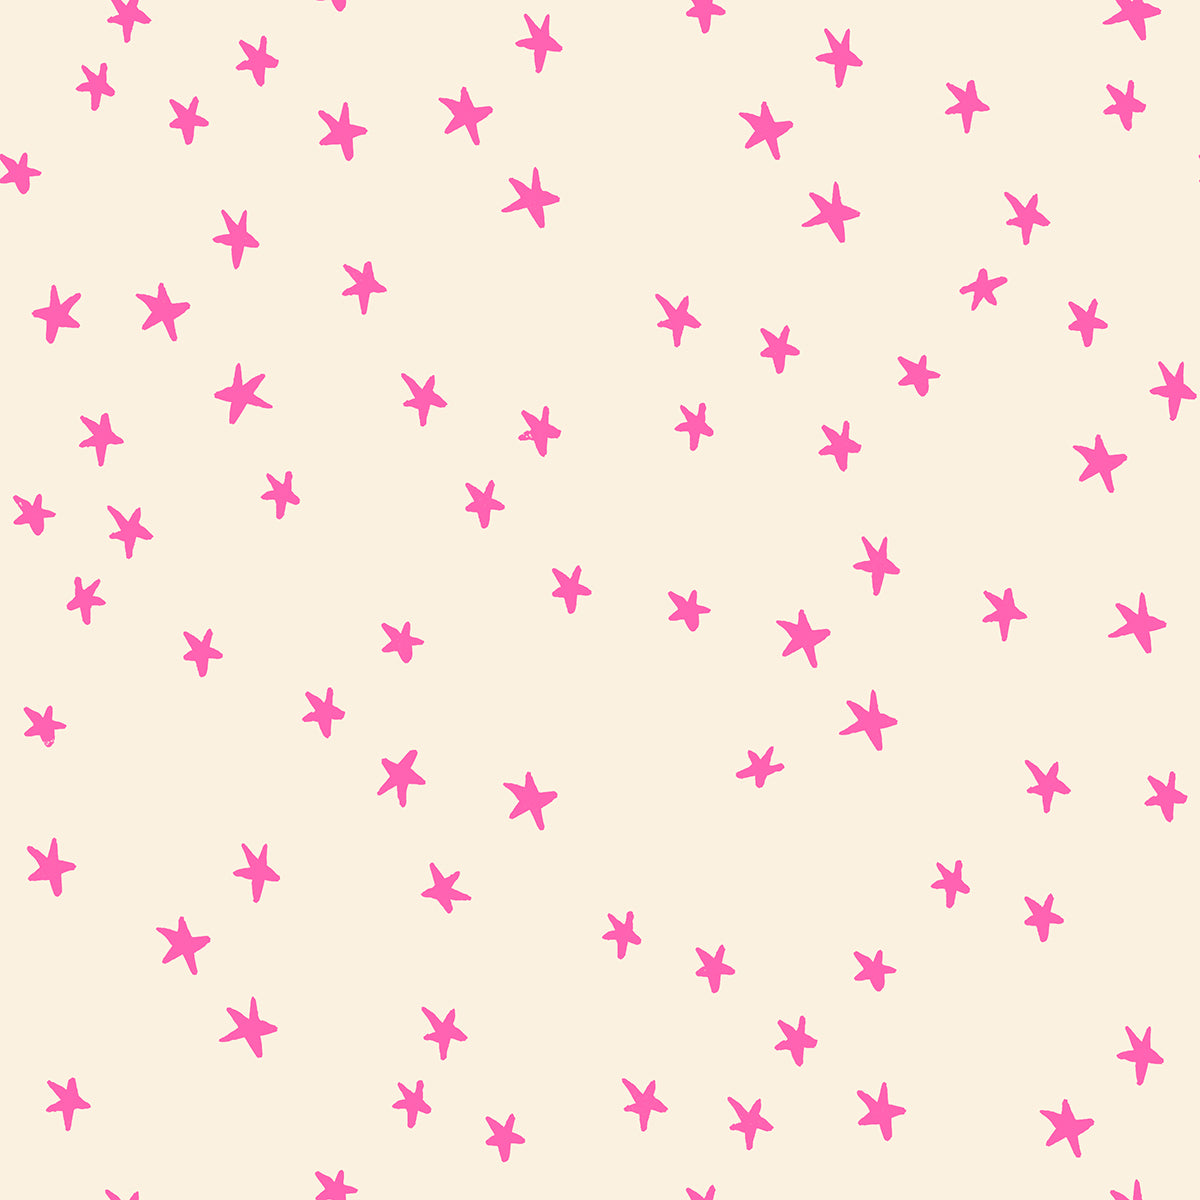 Neon Pink - Starry